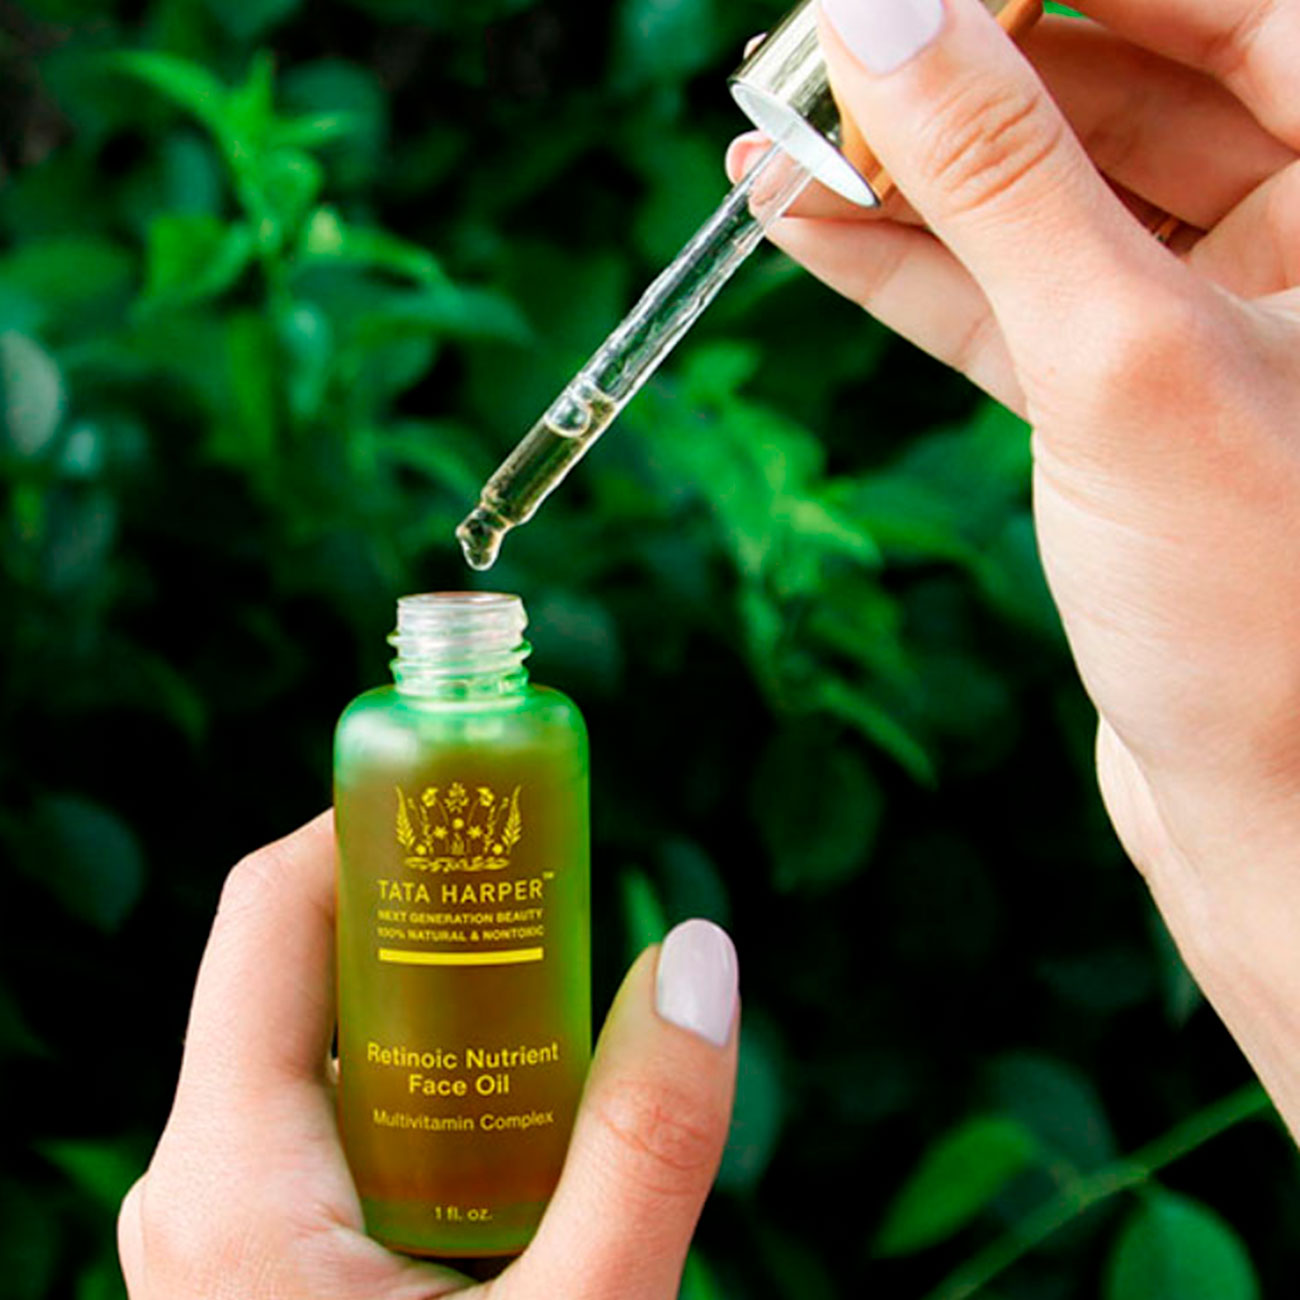 Retinoic nutrient face oil